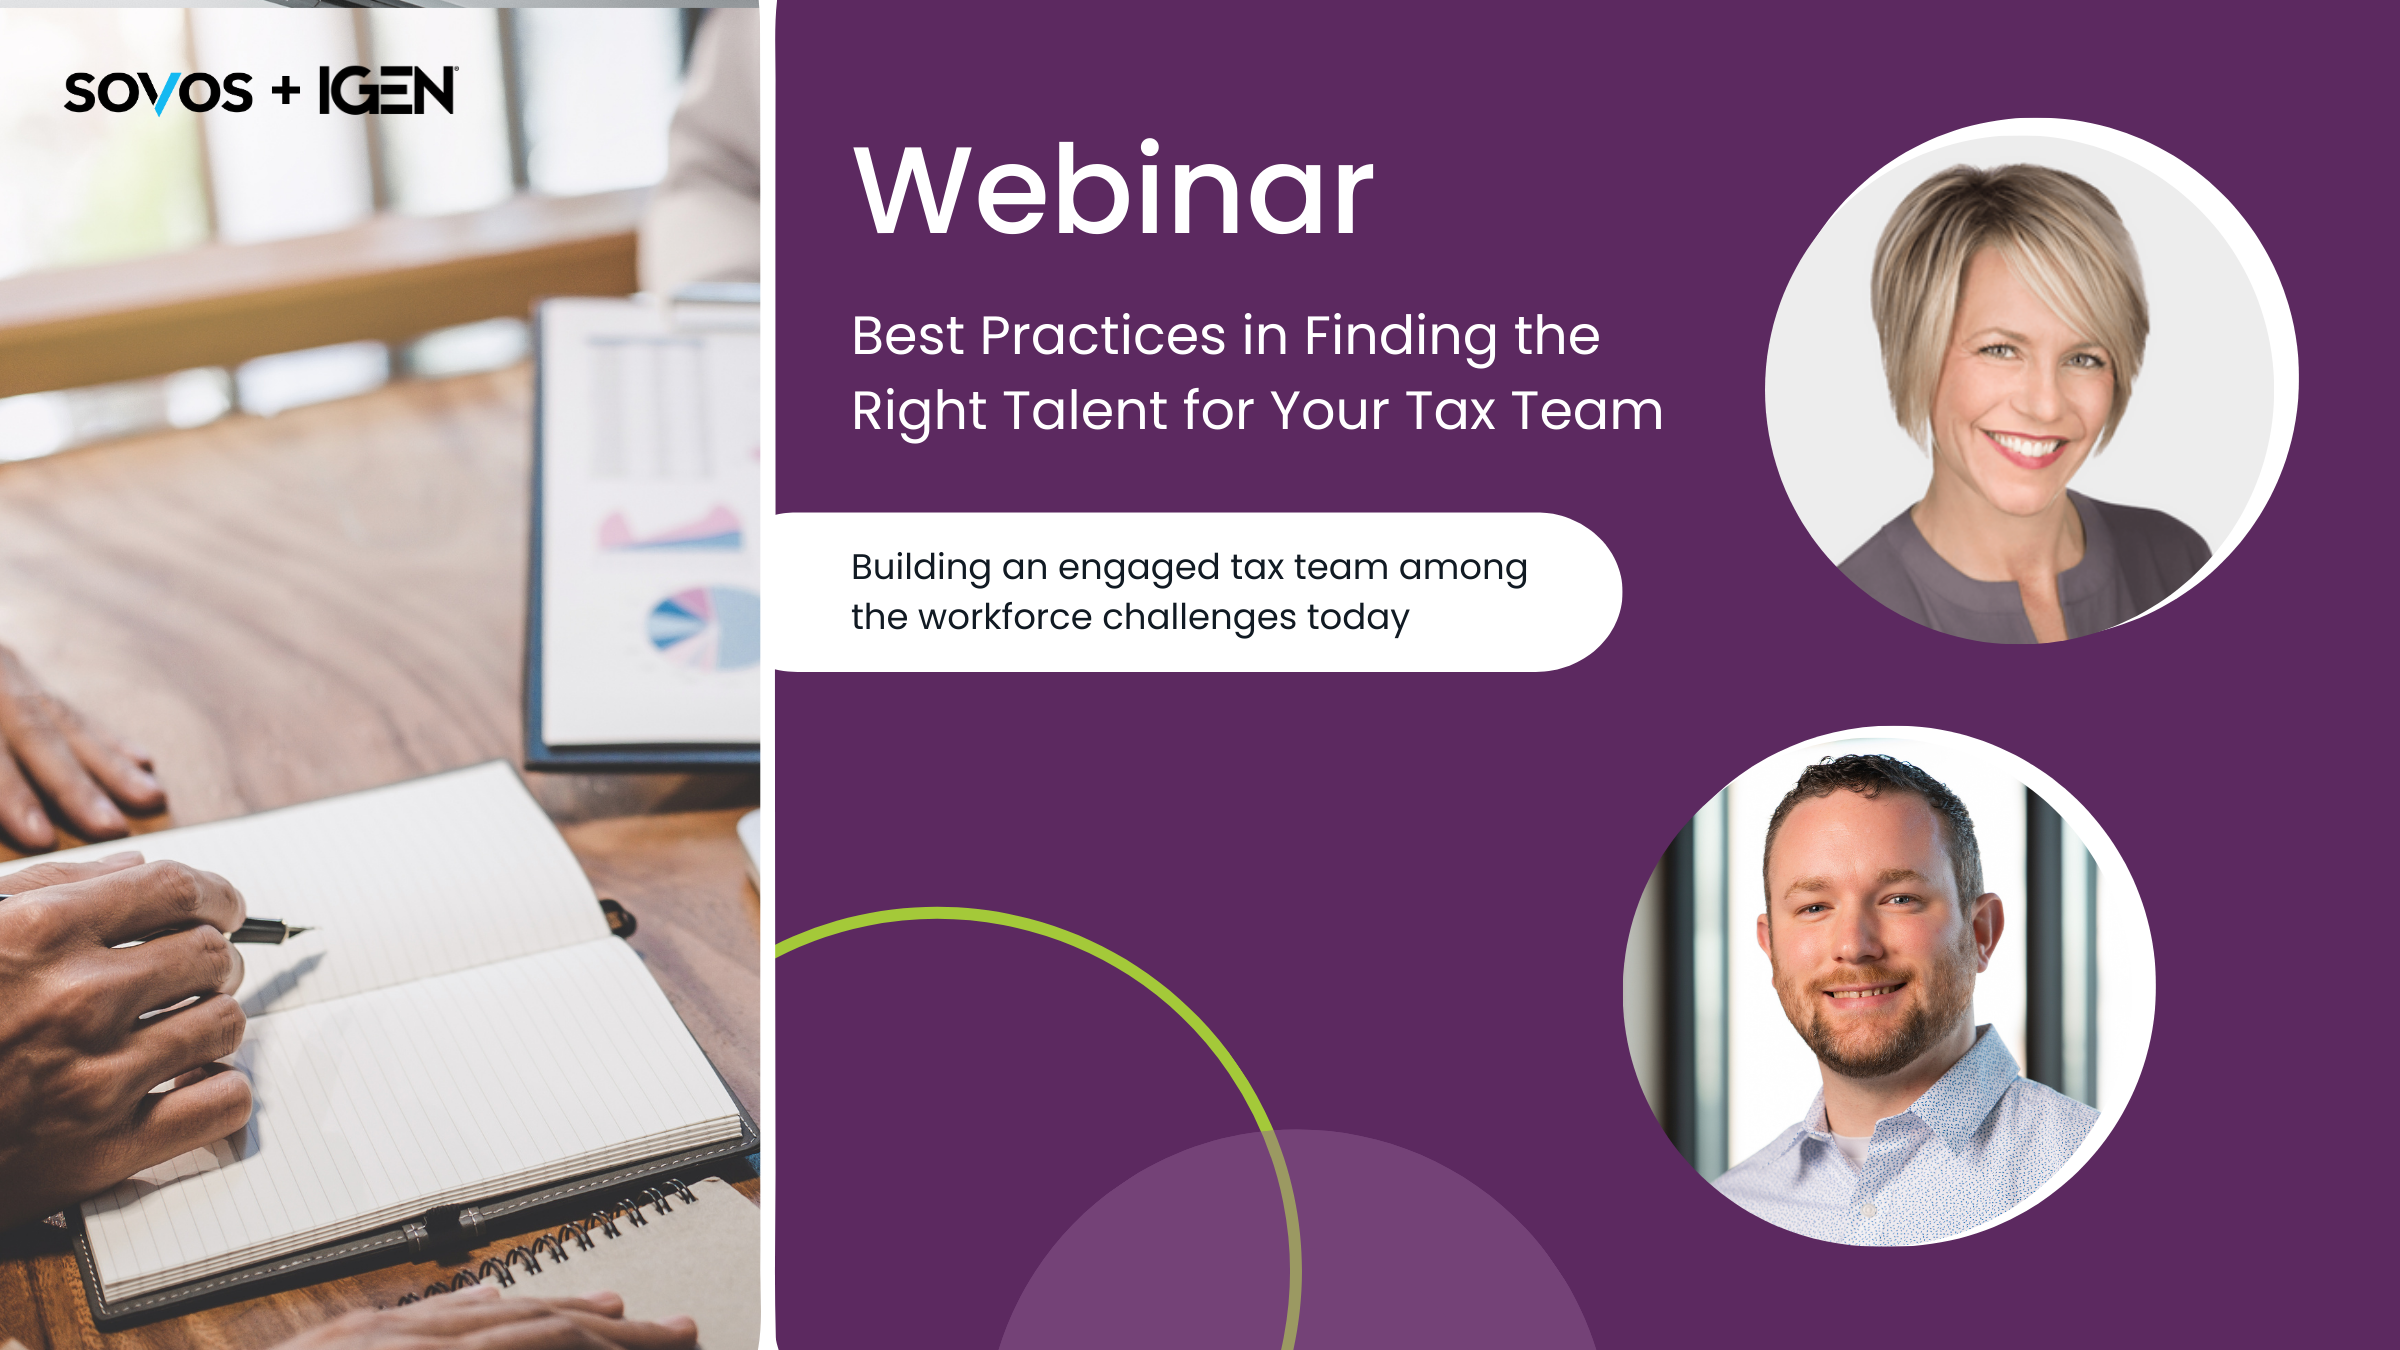 Hiring Tax Talent Best Practices You Can Apply Today